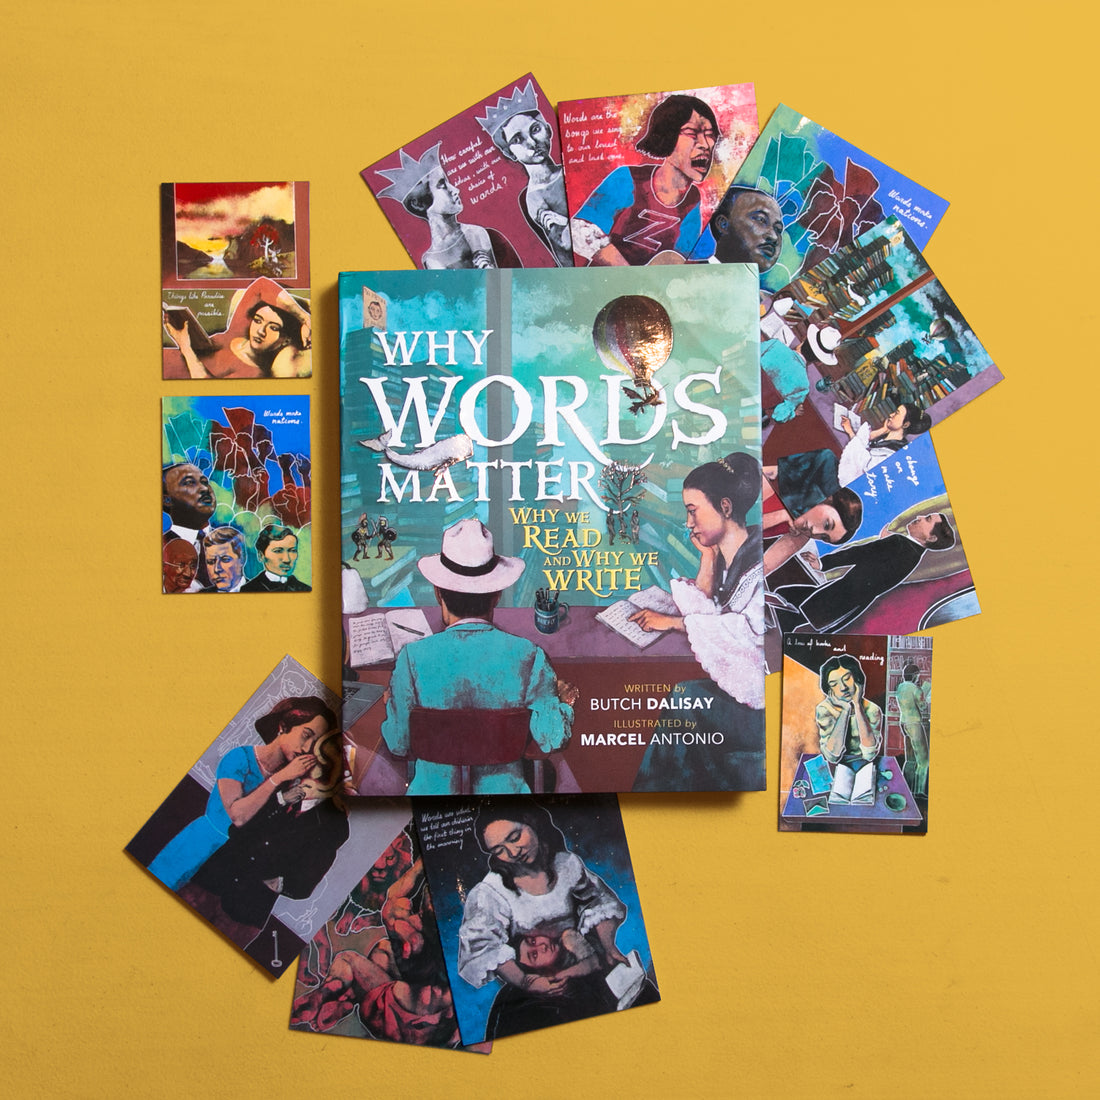 Why Words Matter + Magnets with FREE Art Cards